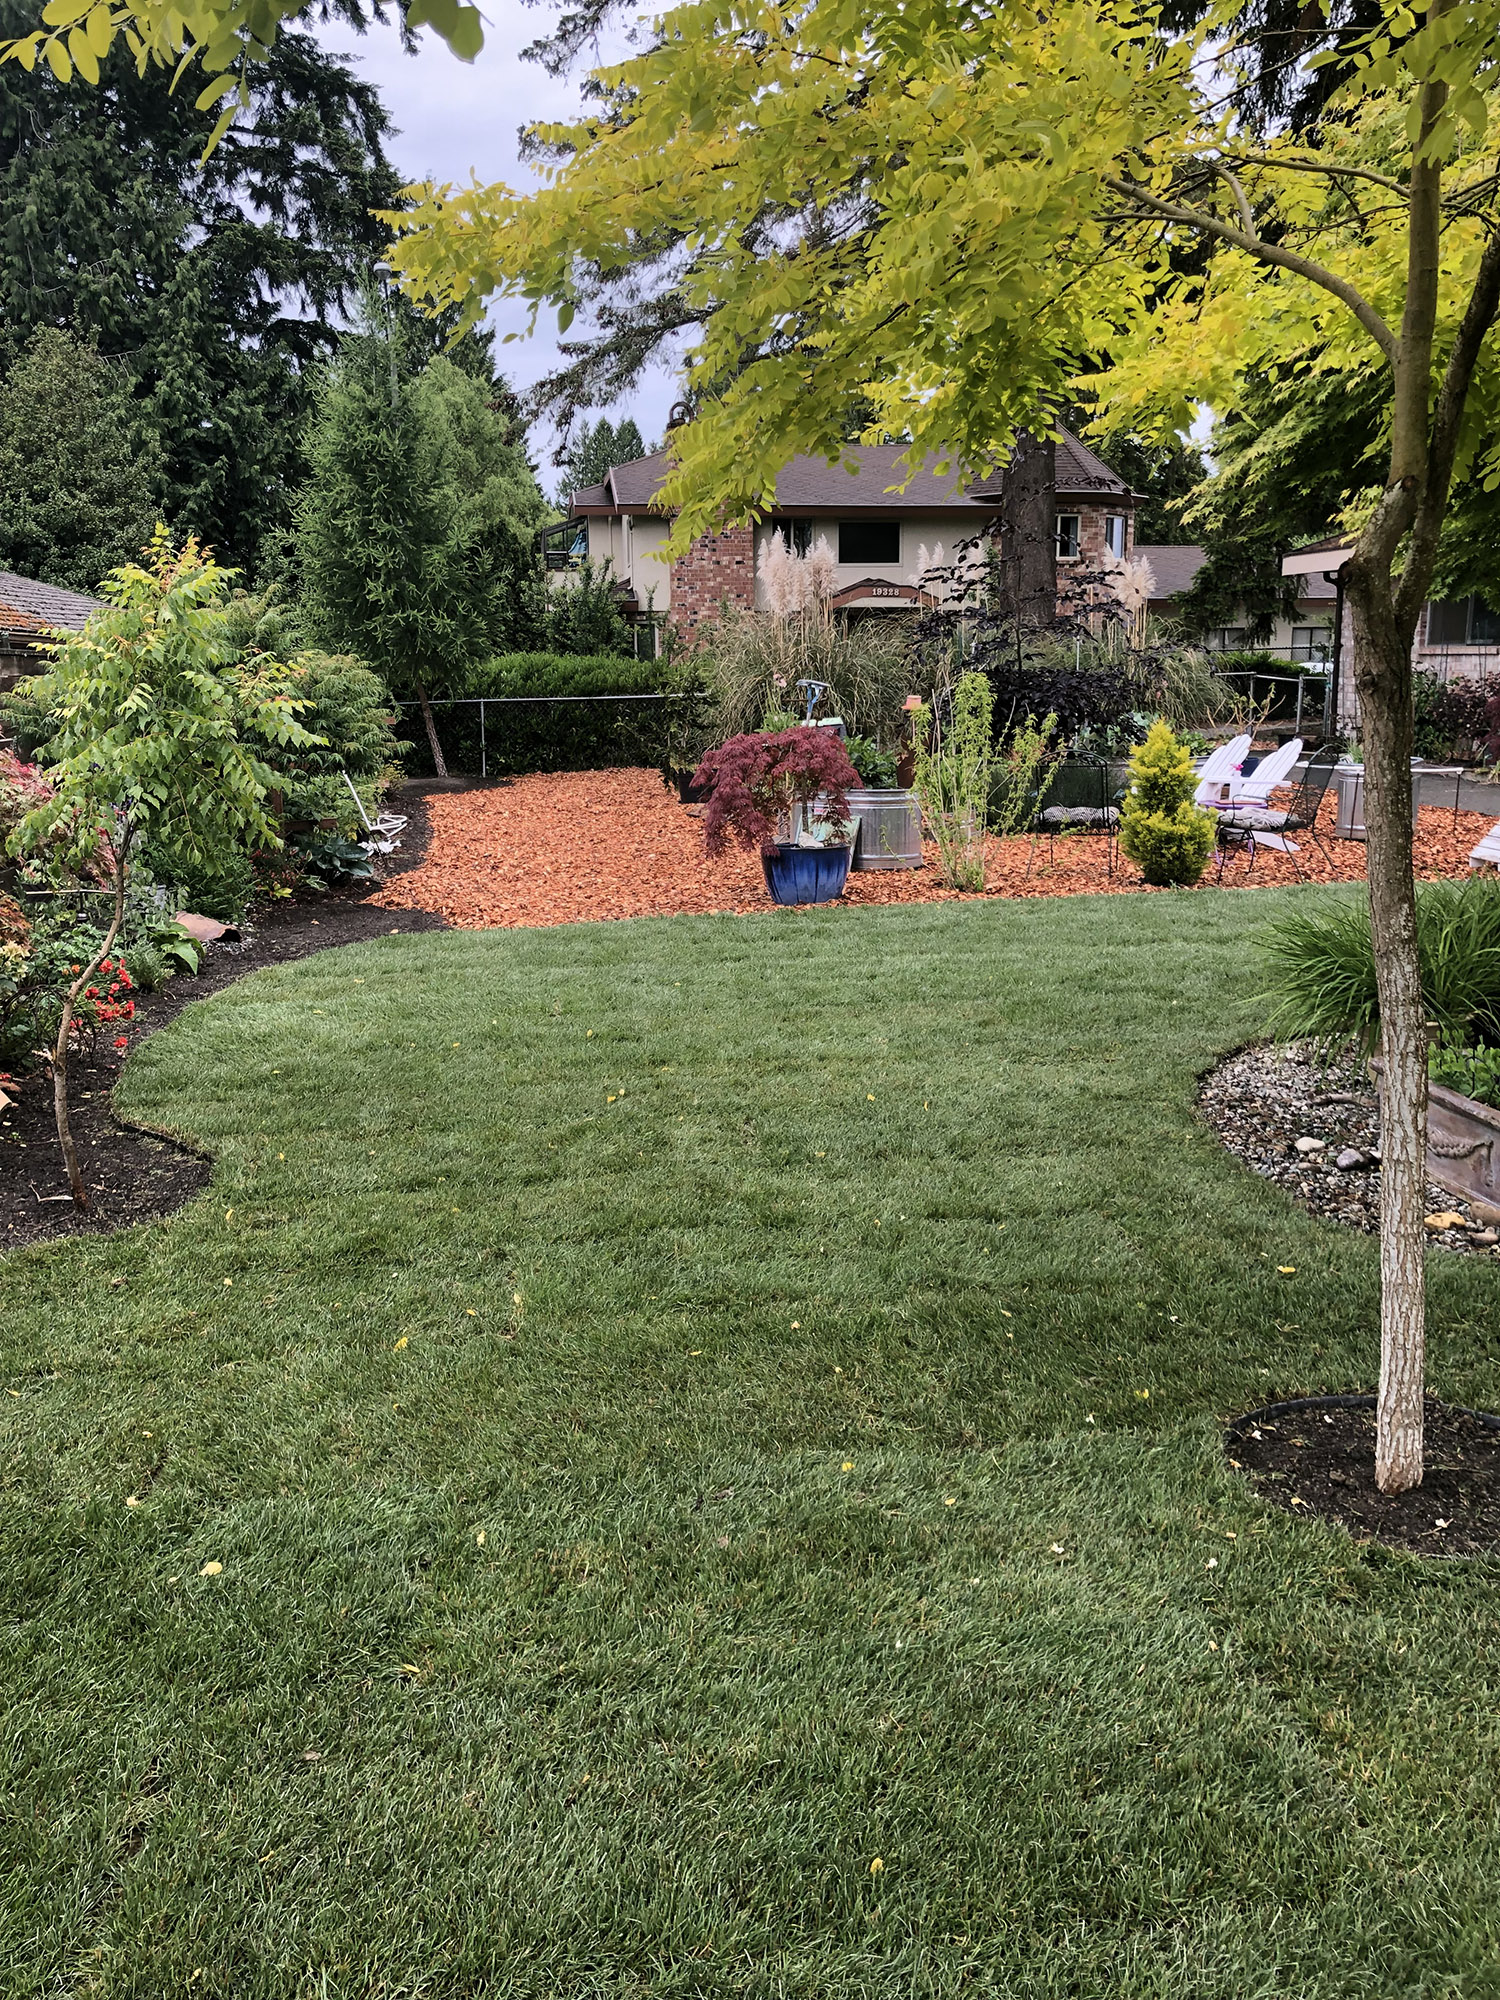 Photo of a yard with a garden in the back.